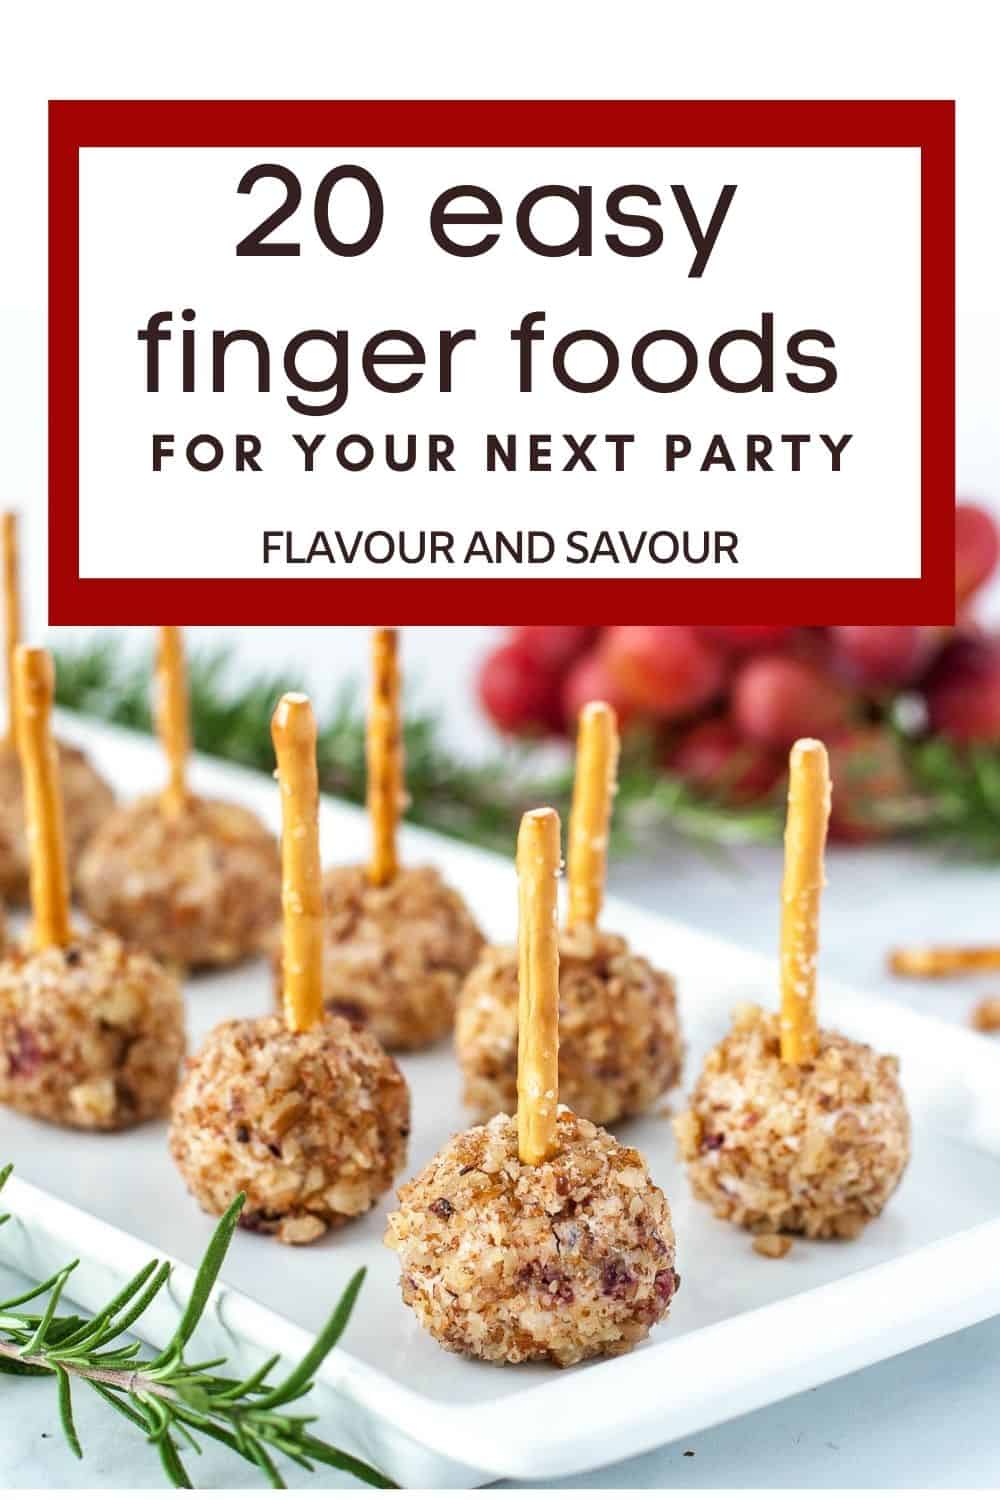 20 Easy Finger Food Appetizers - Flavour and Savour